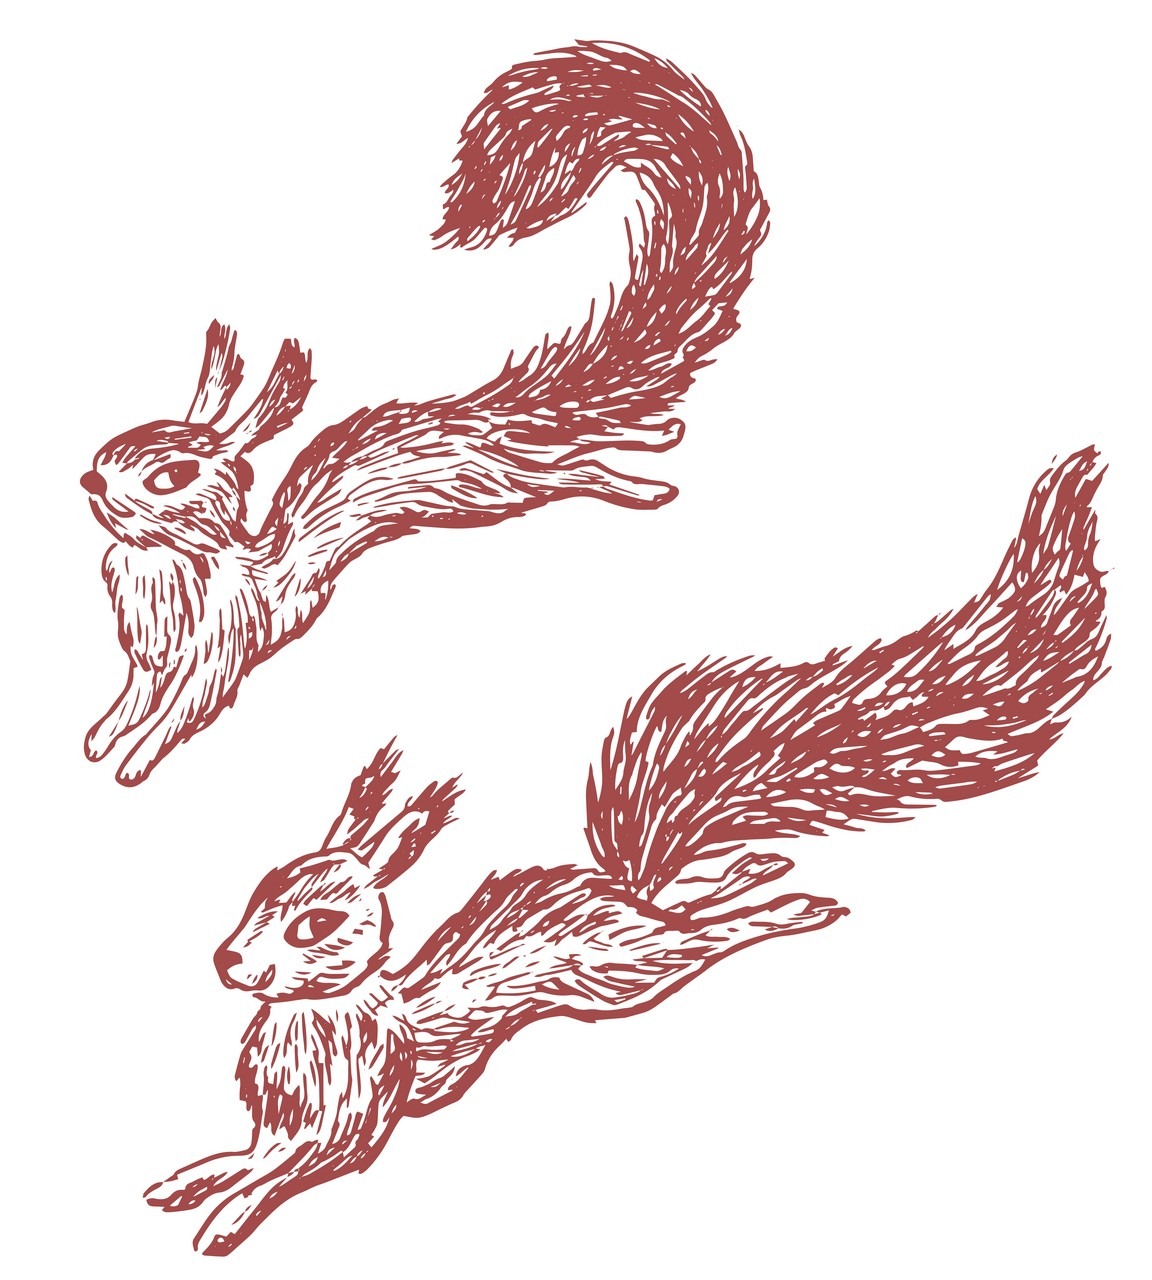 image of two hand drawn squirrels jumping